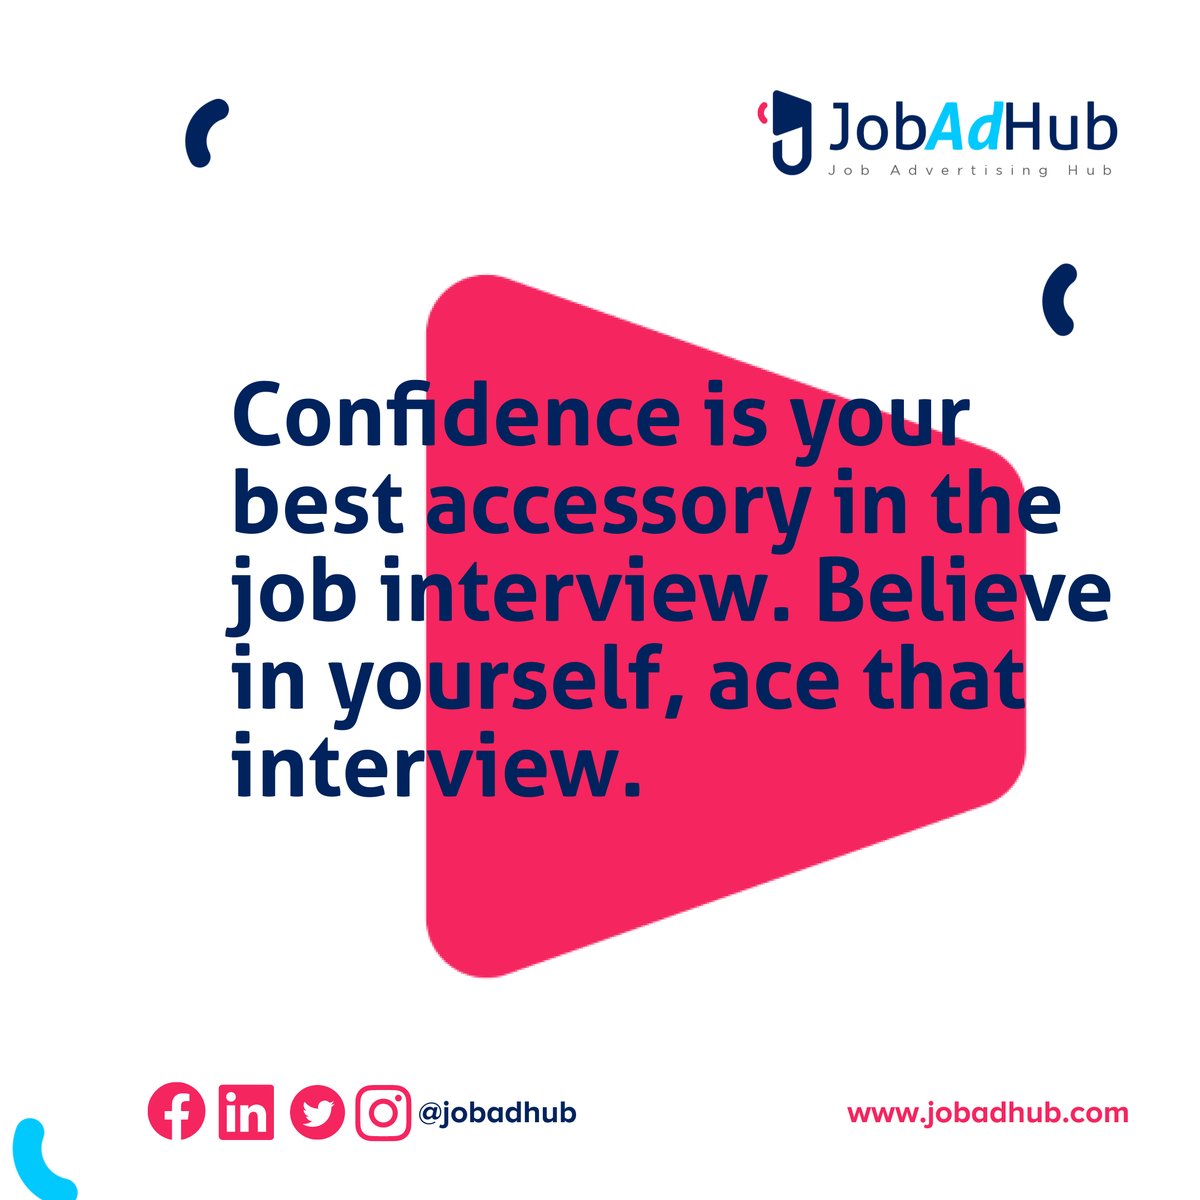 Confidence is your secret weapon in the job interview arena. Trust yourself, and you'll conquer that interview. 💼✨ #JobInterviewTips